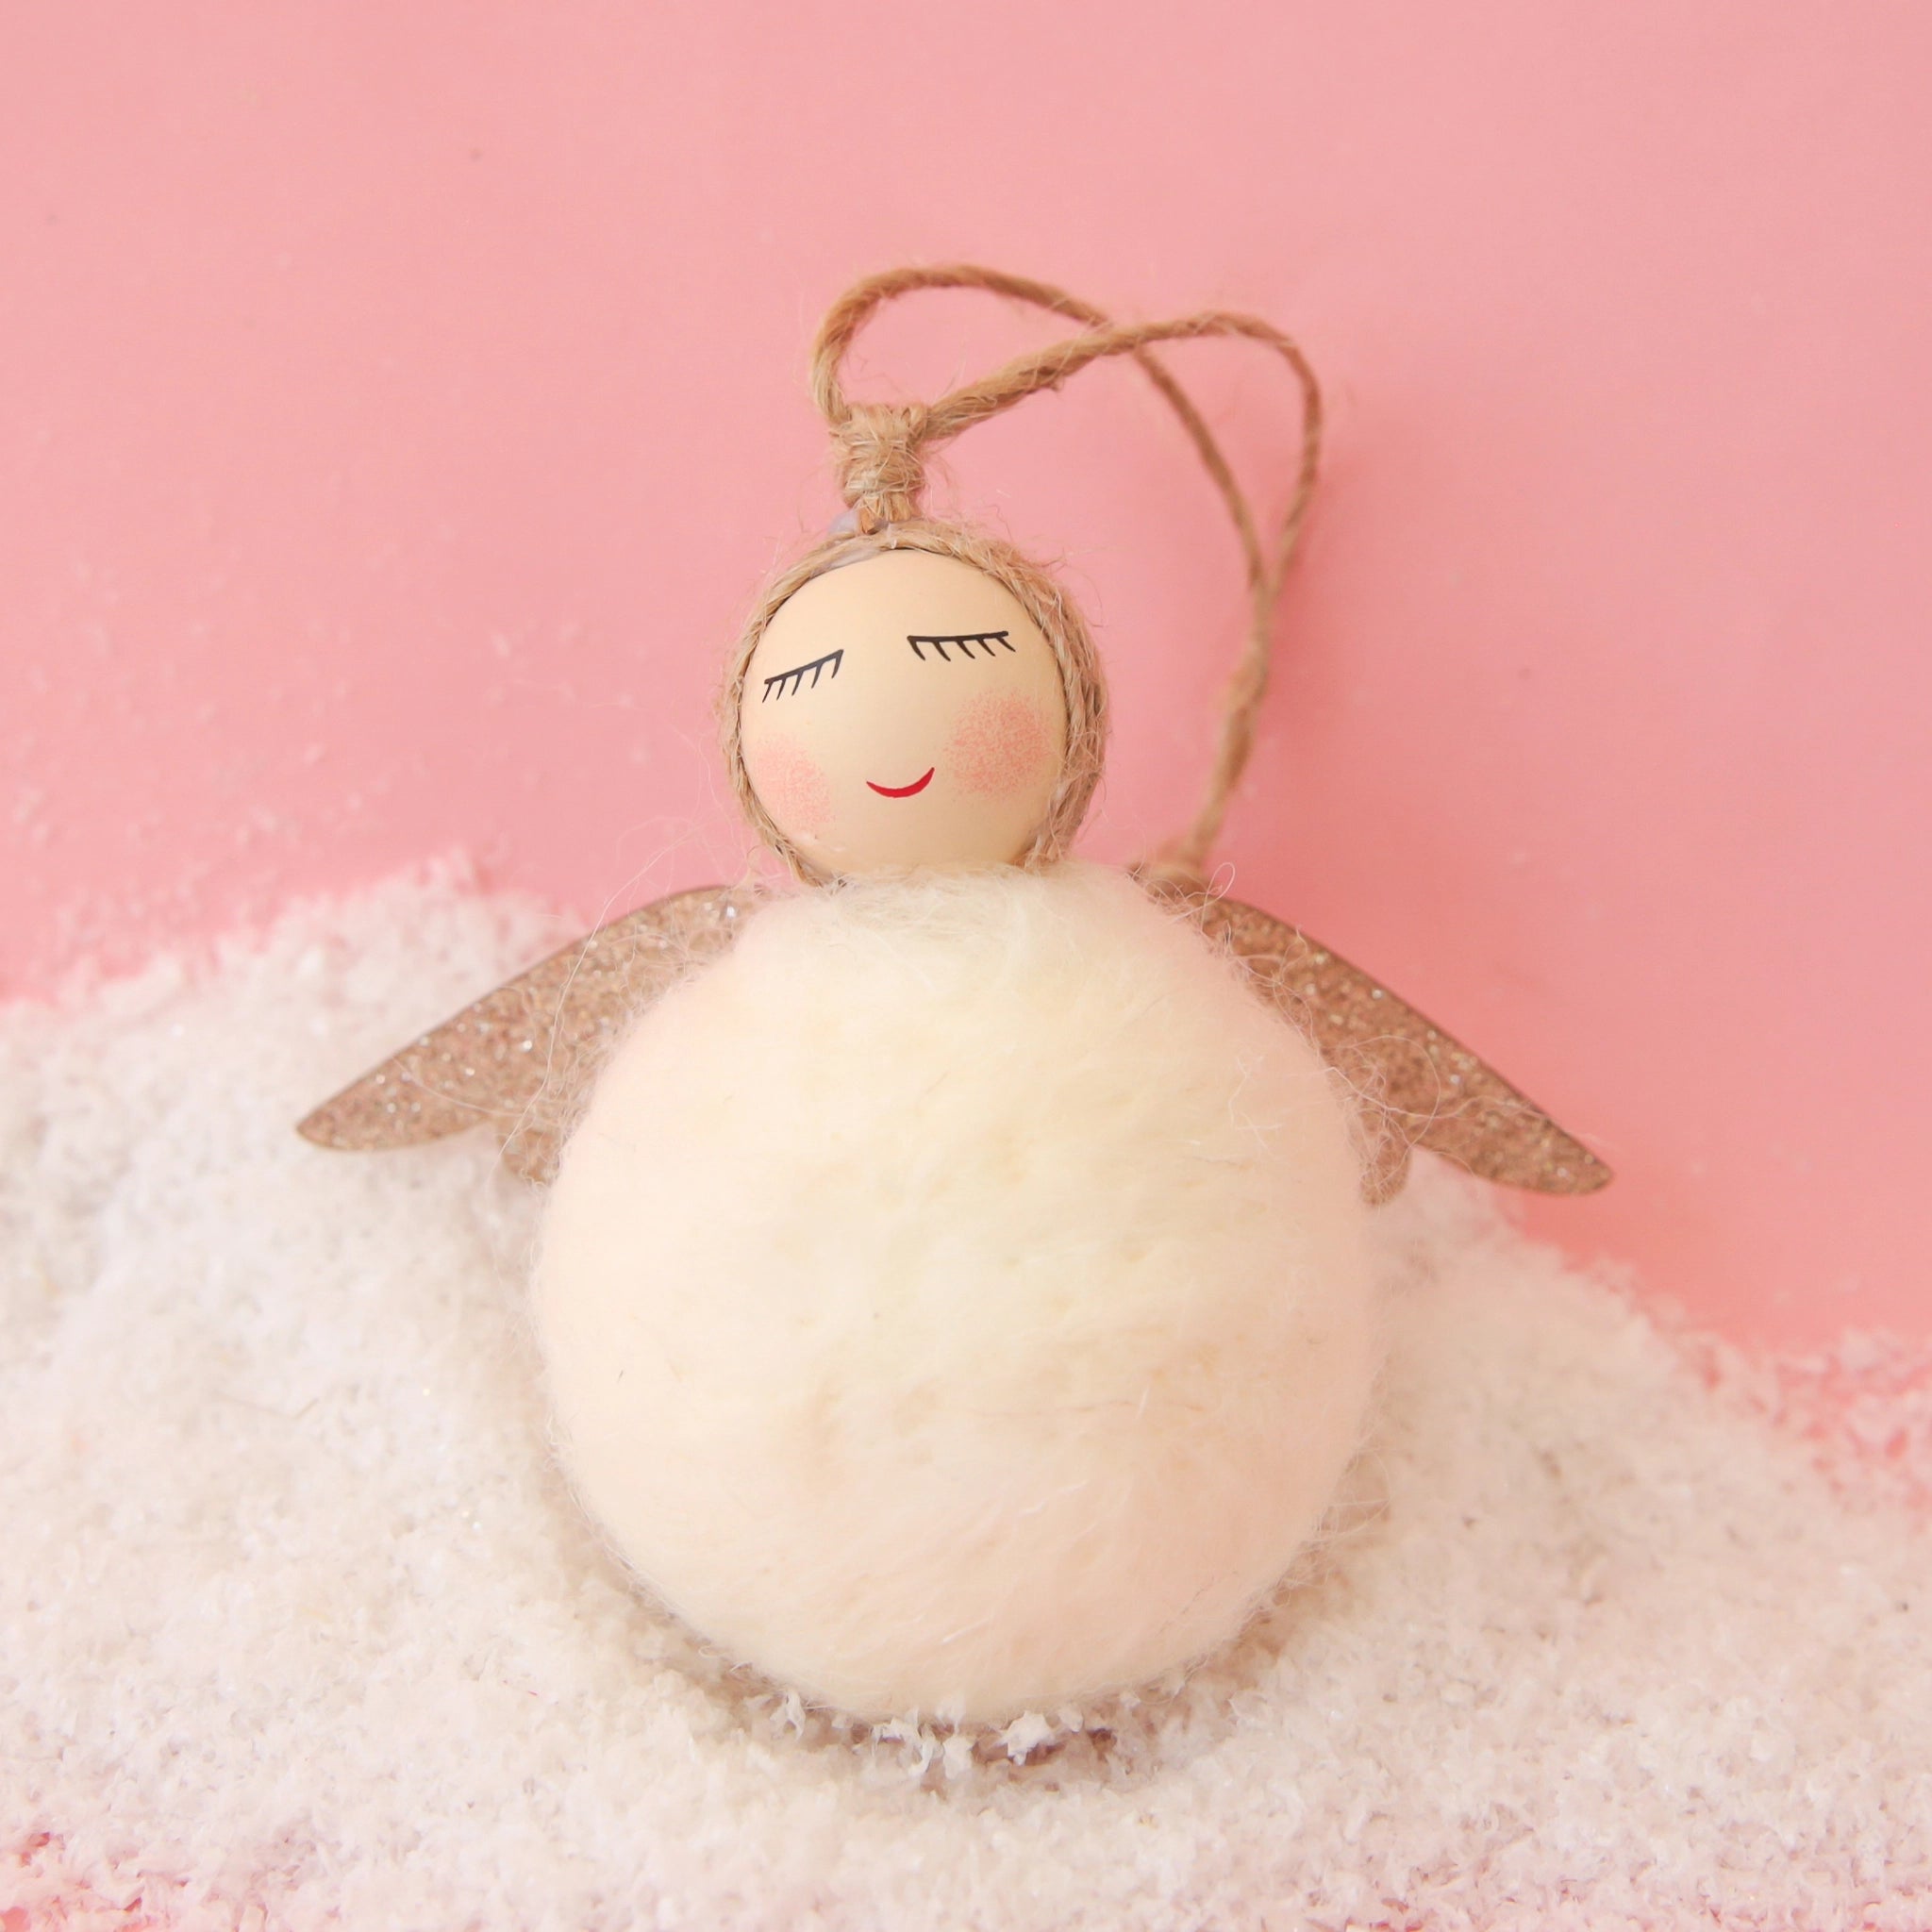 A white felt ball ornament that serves as the angels body along with a wooden bead head with a smiling face and gold sparkle wings. Also pictured is the twine loop for hanging.